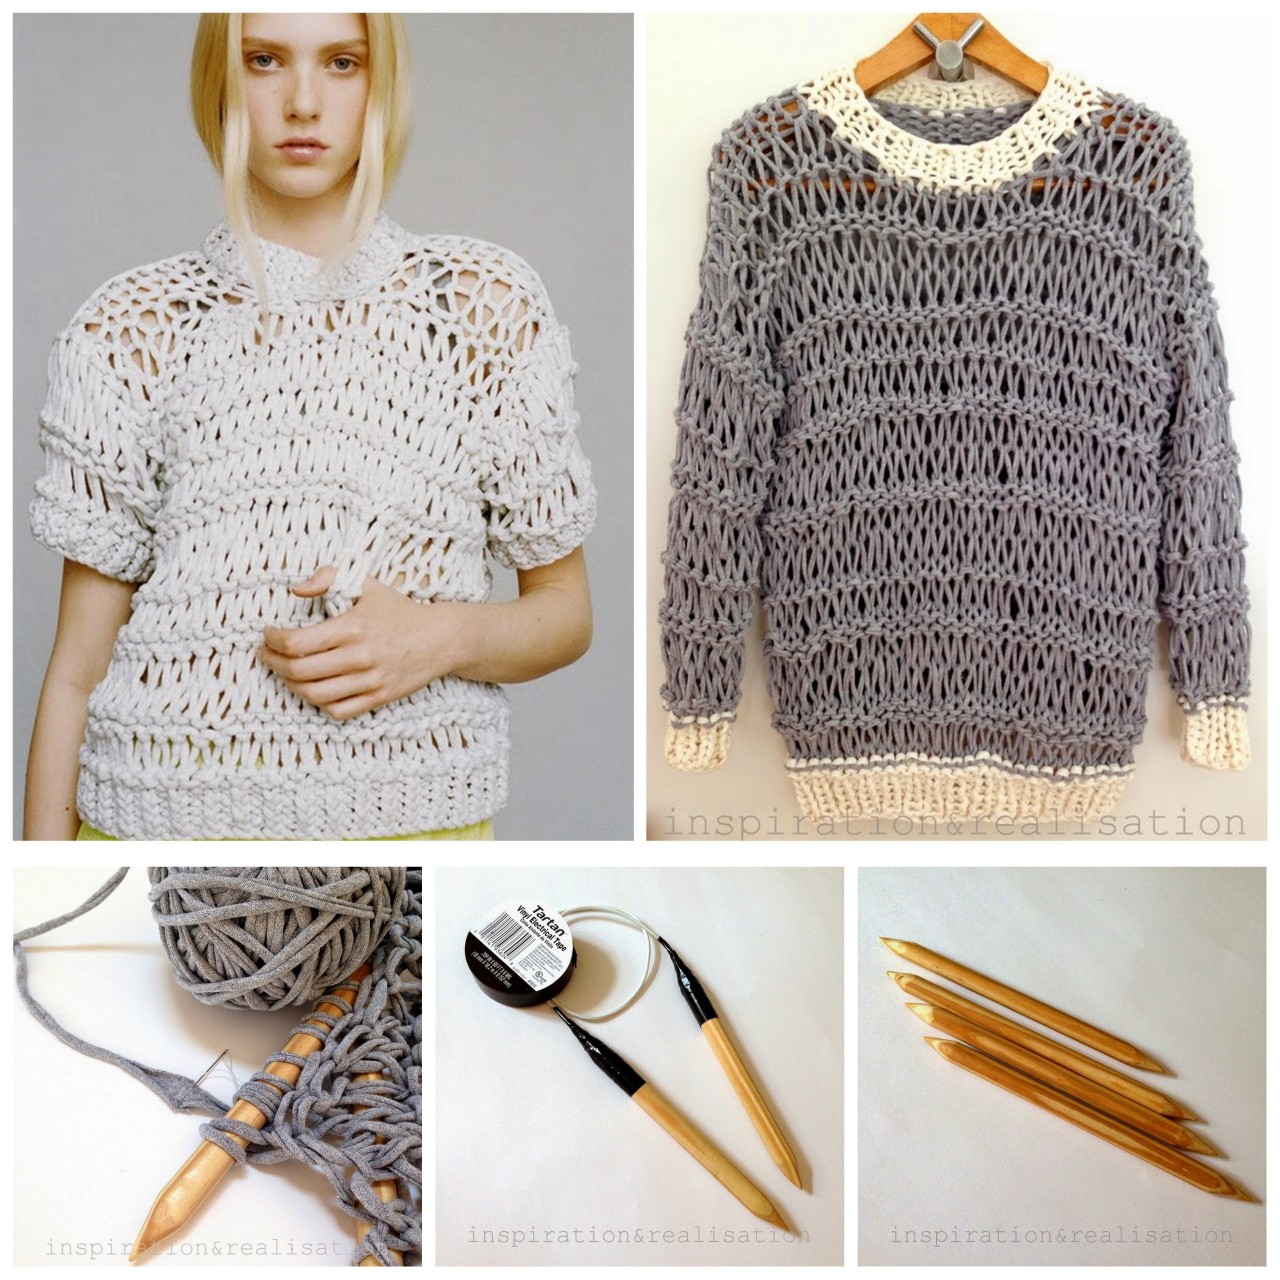 DIY Tee Shirt Yarn Sweater Tutorial and Pattern from inspiration ...